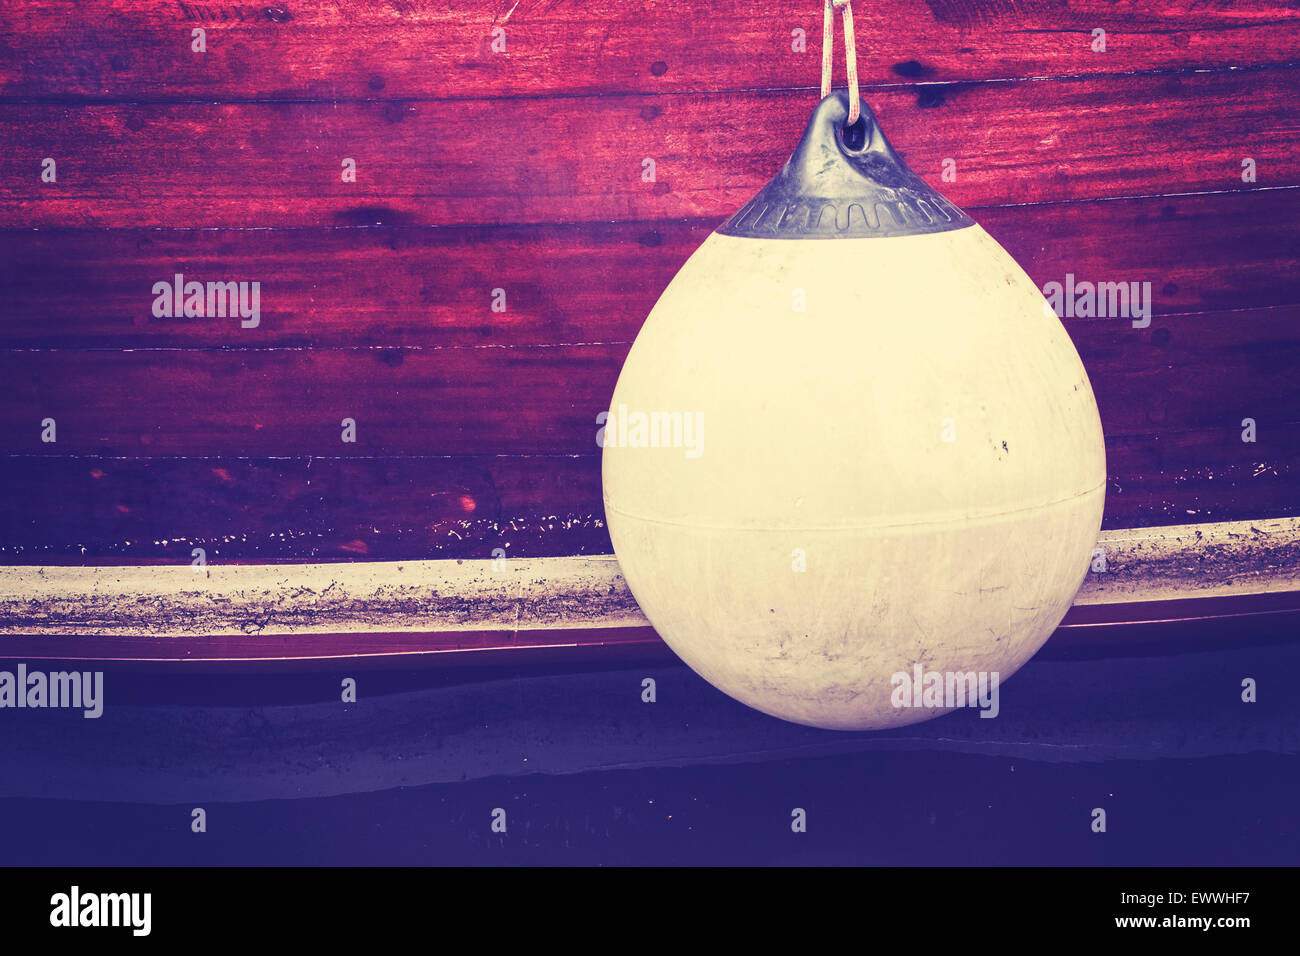 Rubber buoy for protecting moored yachts in marina, vintage toned concept photo. Stock Photo